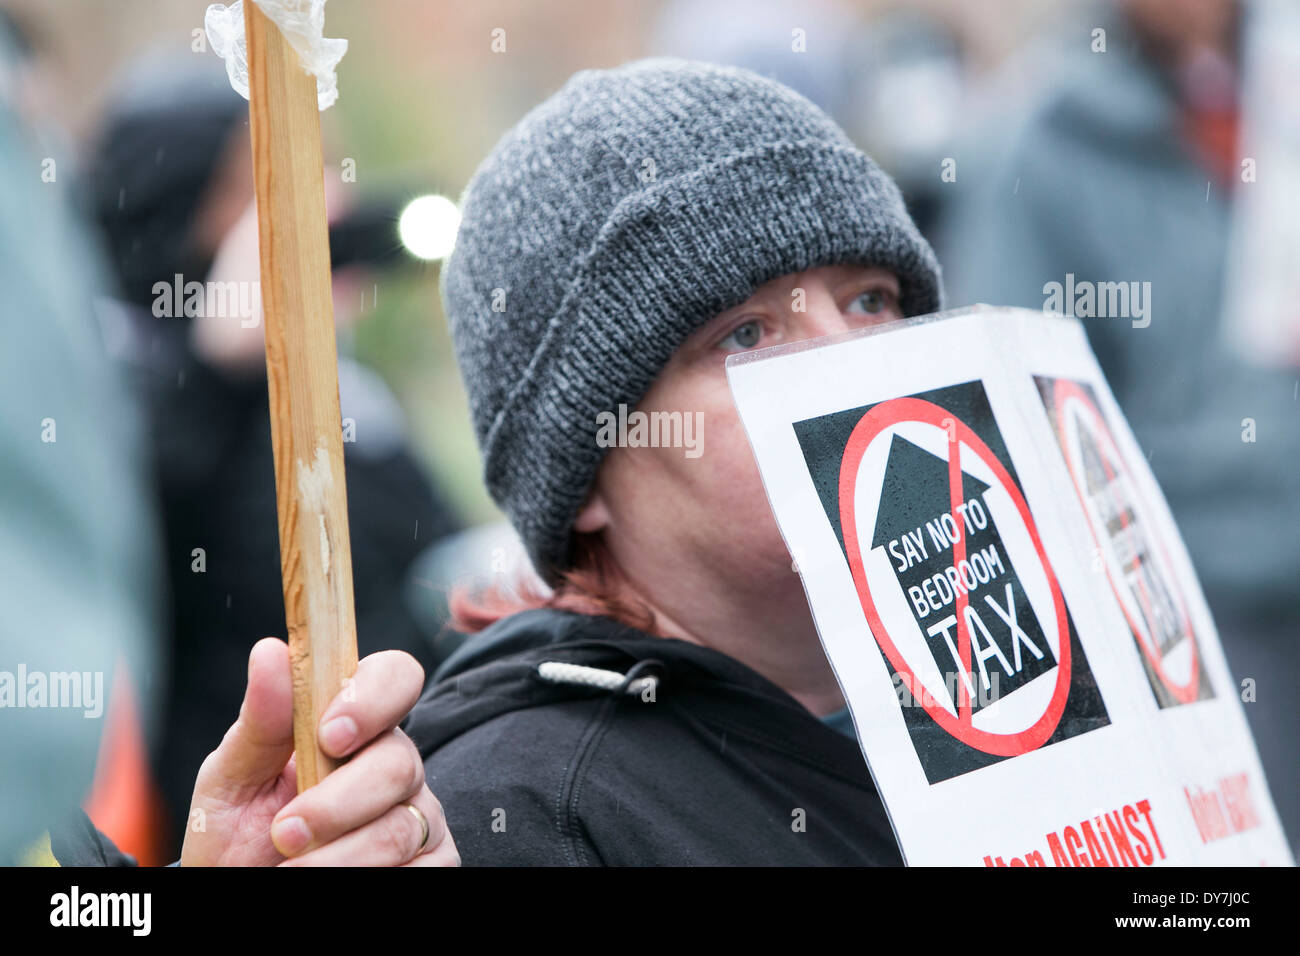 Protestors march through Manchester City Centre today (Sat 05/04/14) in opposition to the bedroom tax. Stock Photo